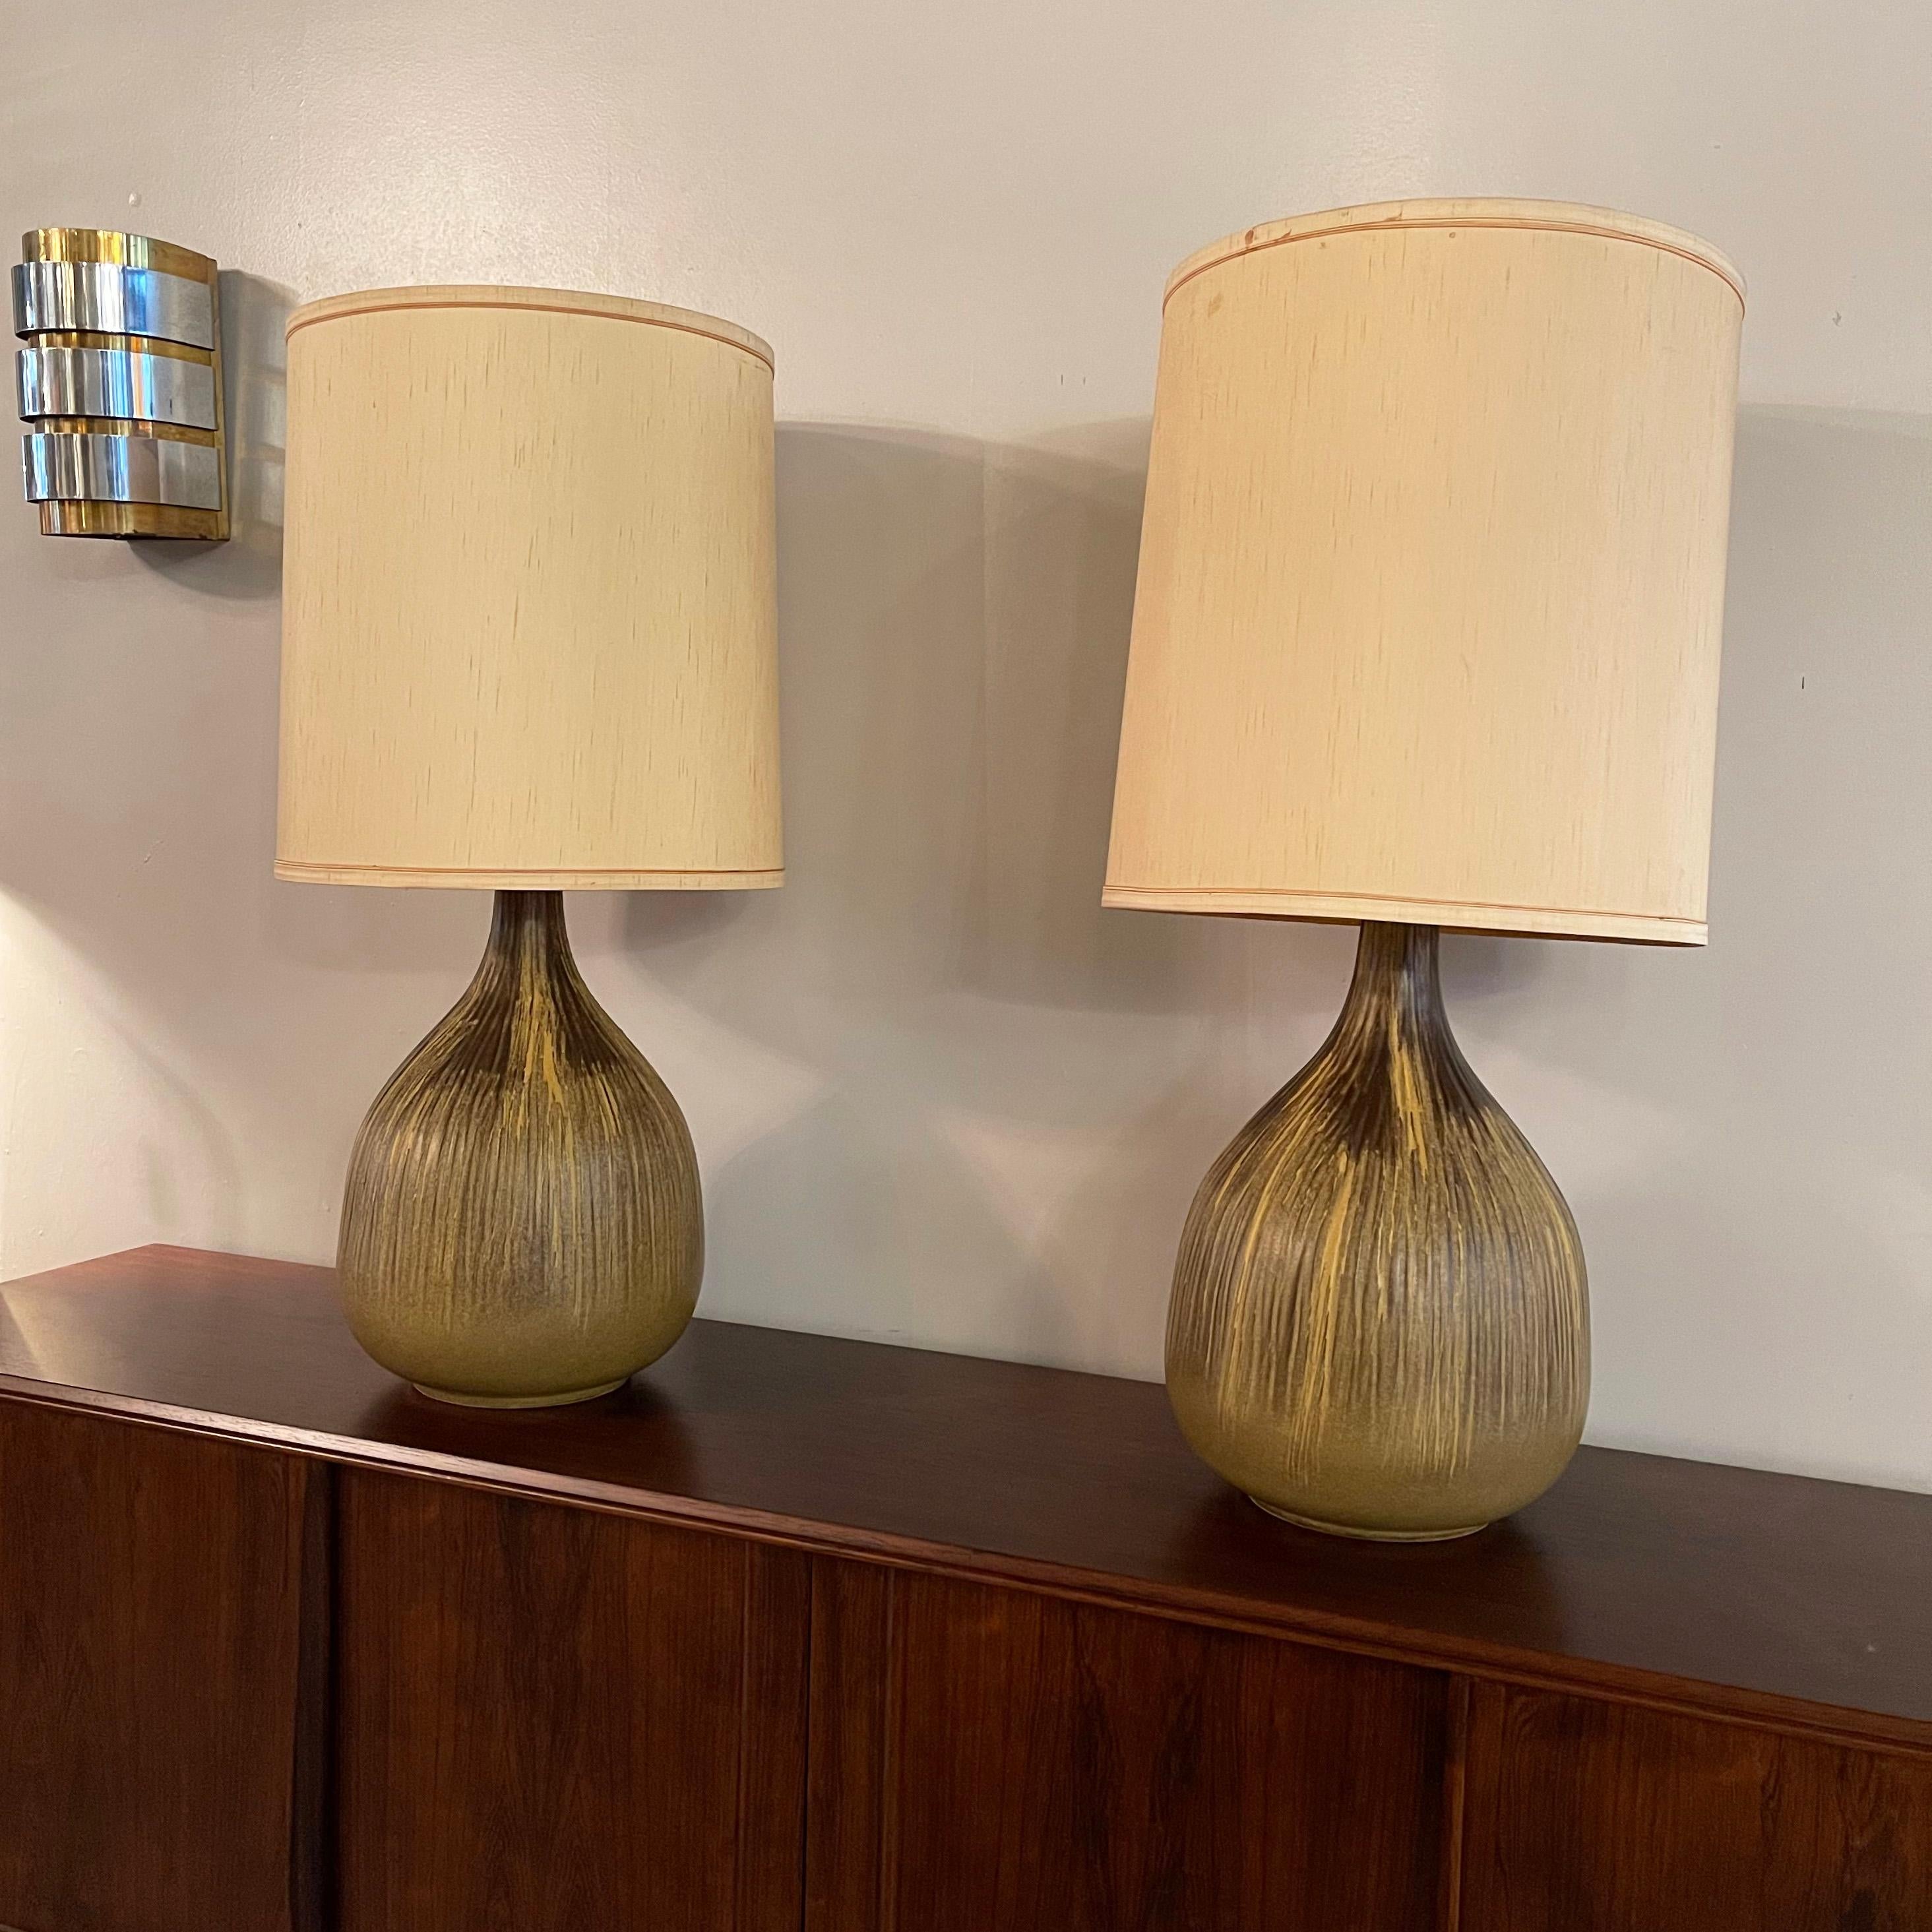 Pair of large, Mid-Century Modern table lamps feature art pottery, green gourd shaped and textured bases, wood necks, brass hardware and raw silk fabric shades. The height to the top of the socket is 22 inches.